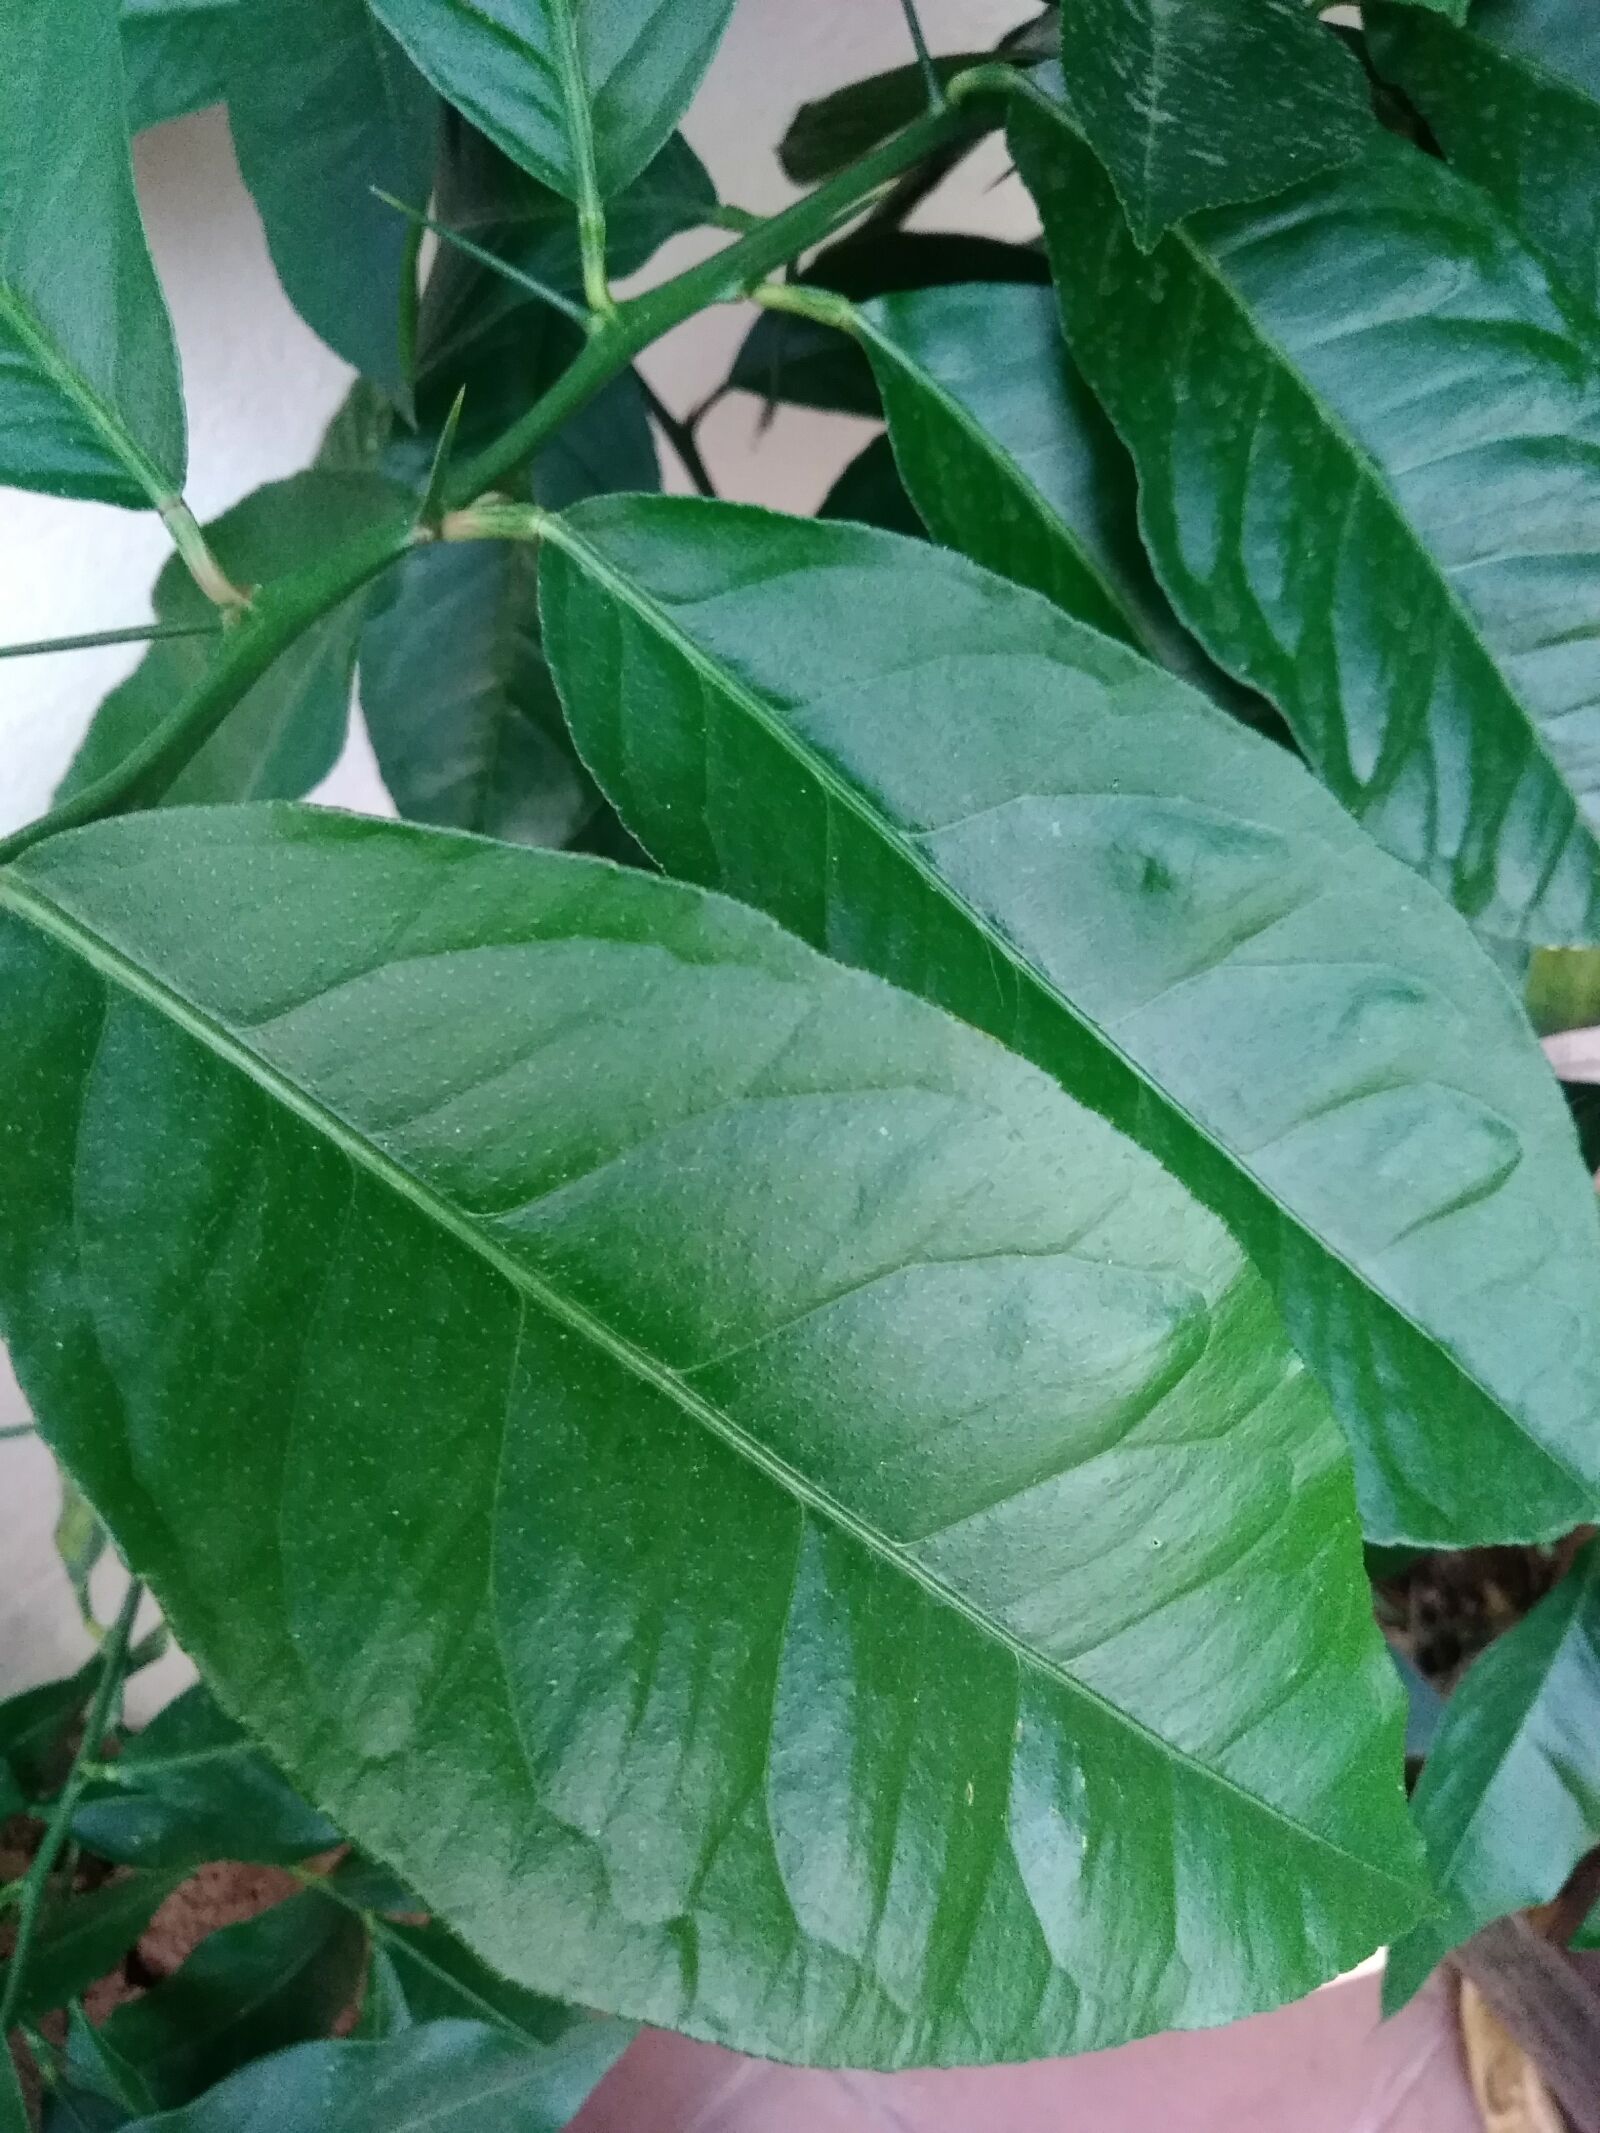 HUAWEI GR3 2017 sample photo. Leaves, nature, green photography